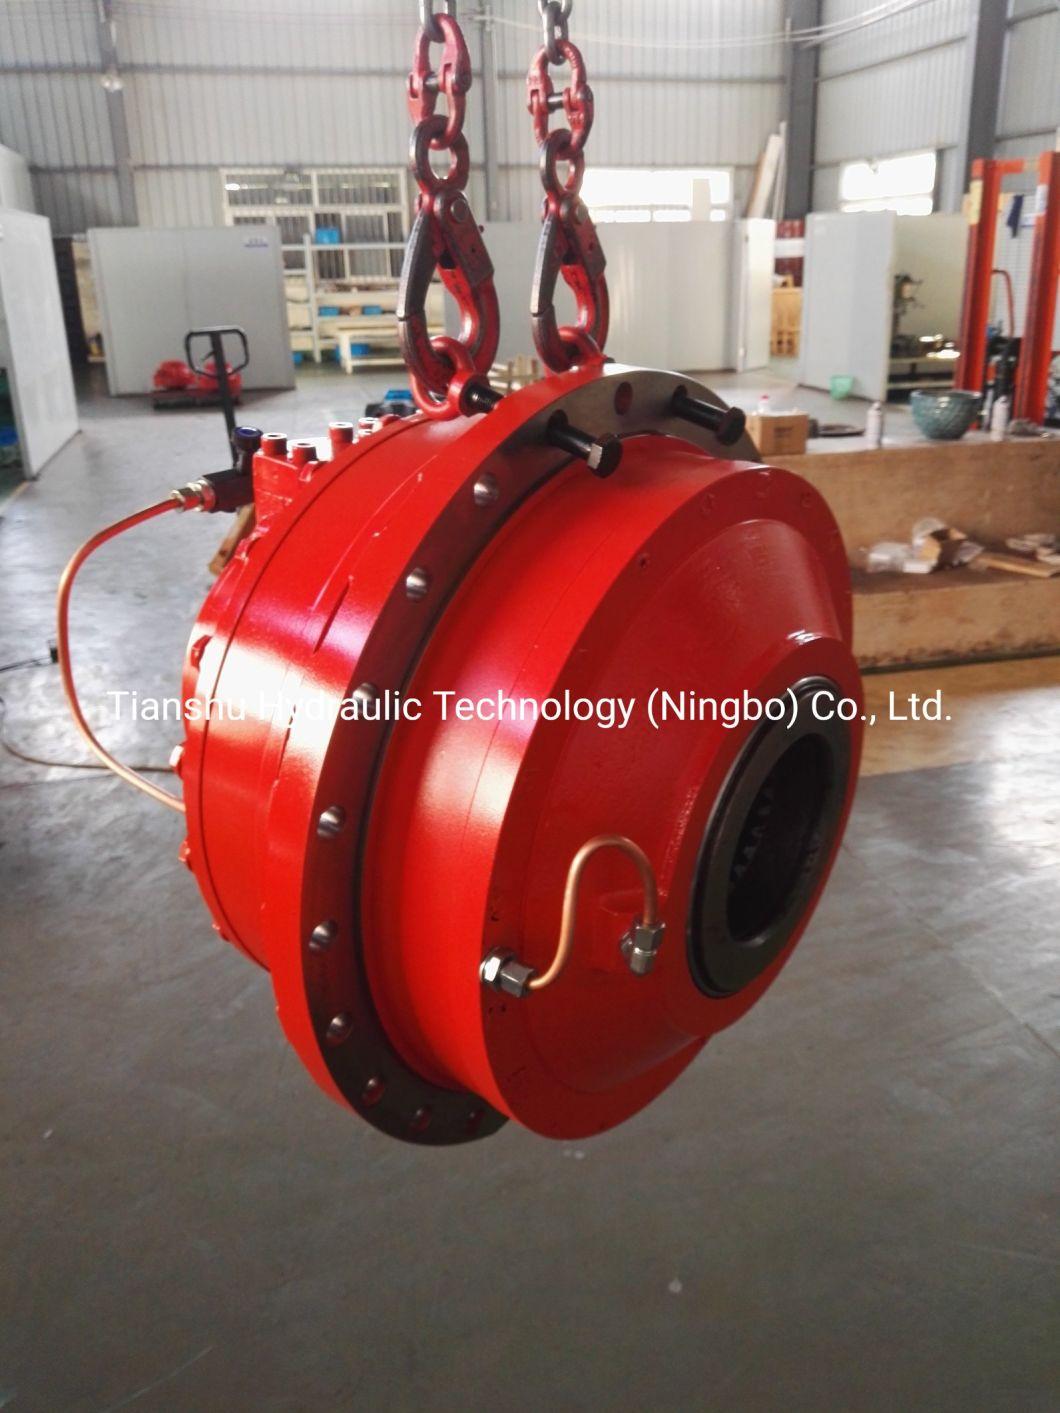 Factory Sale Rexroth Hydraulic Radial Piston Motor Hagglunds Ca Series with Brake for Winch and Anchor Motor.